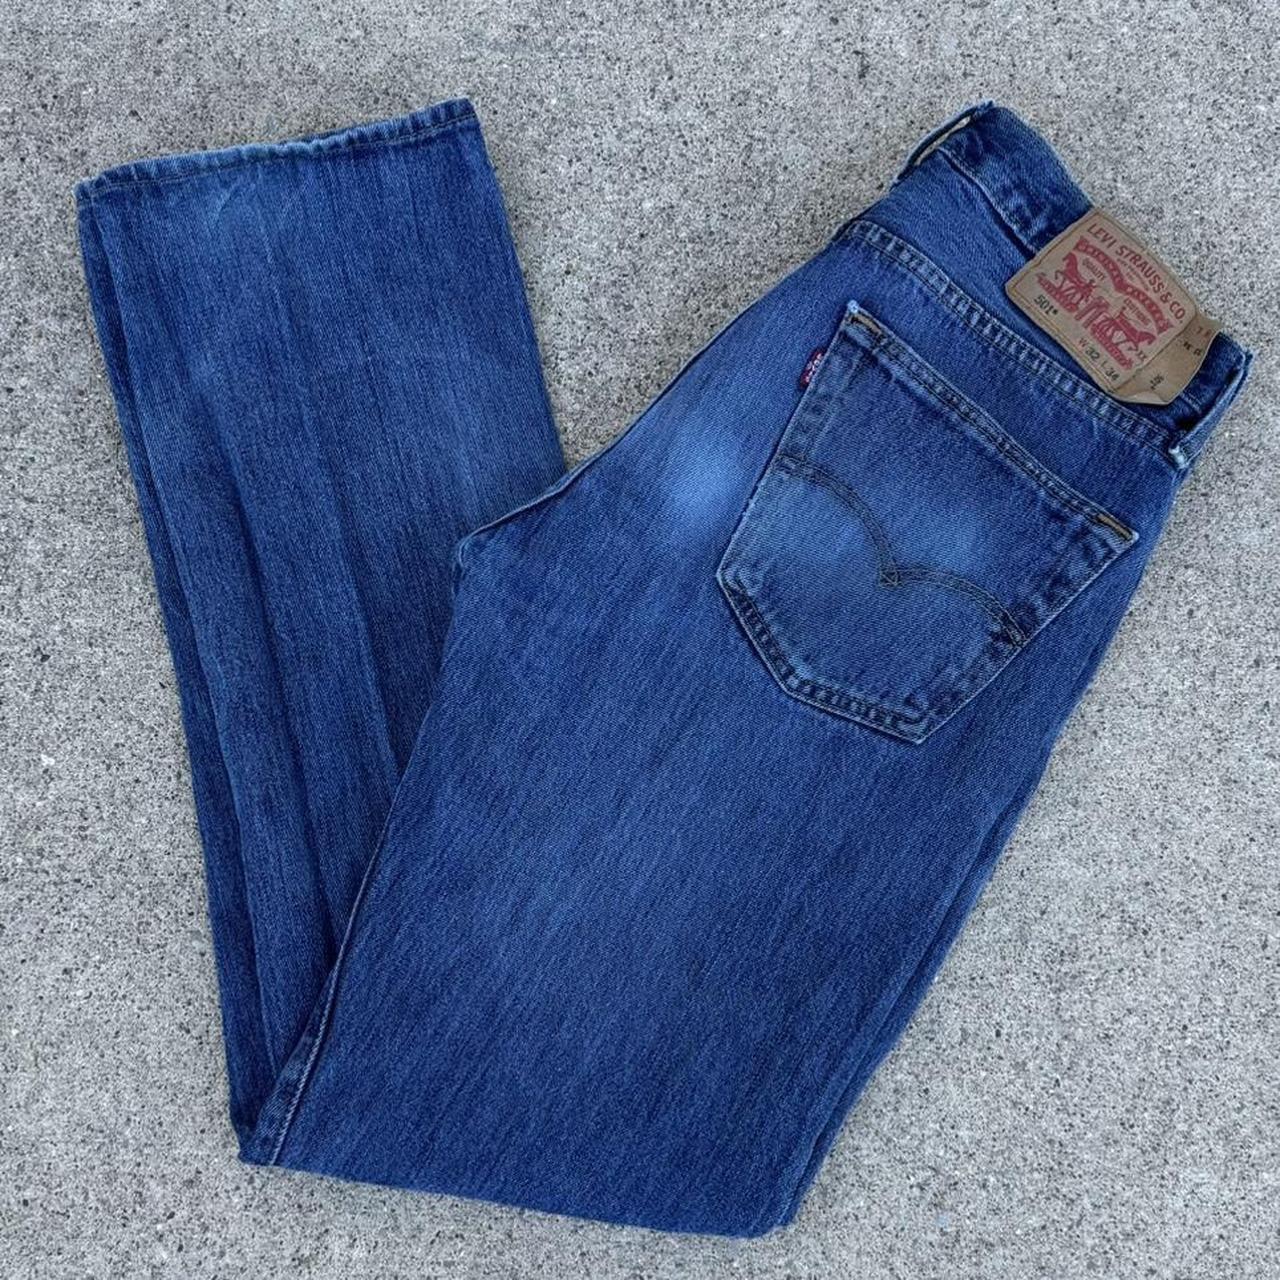 Levi’s 501 Straight Leg Button Fly Jeans Tagged... - Depop